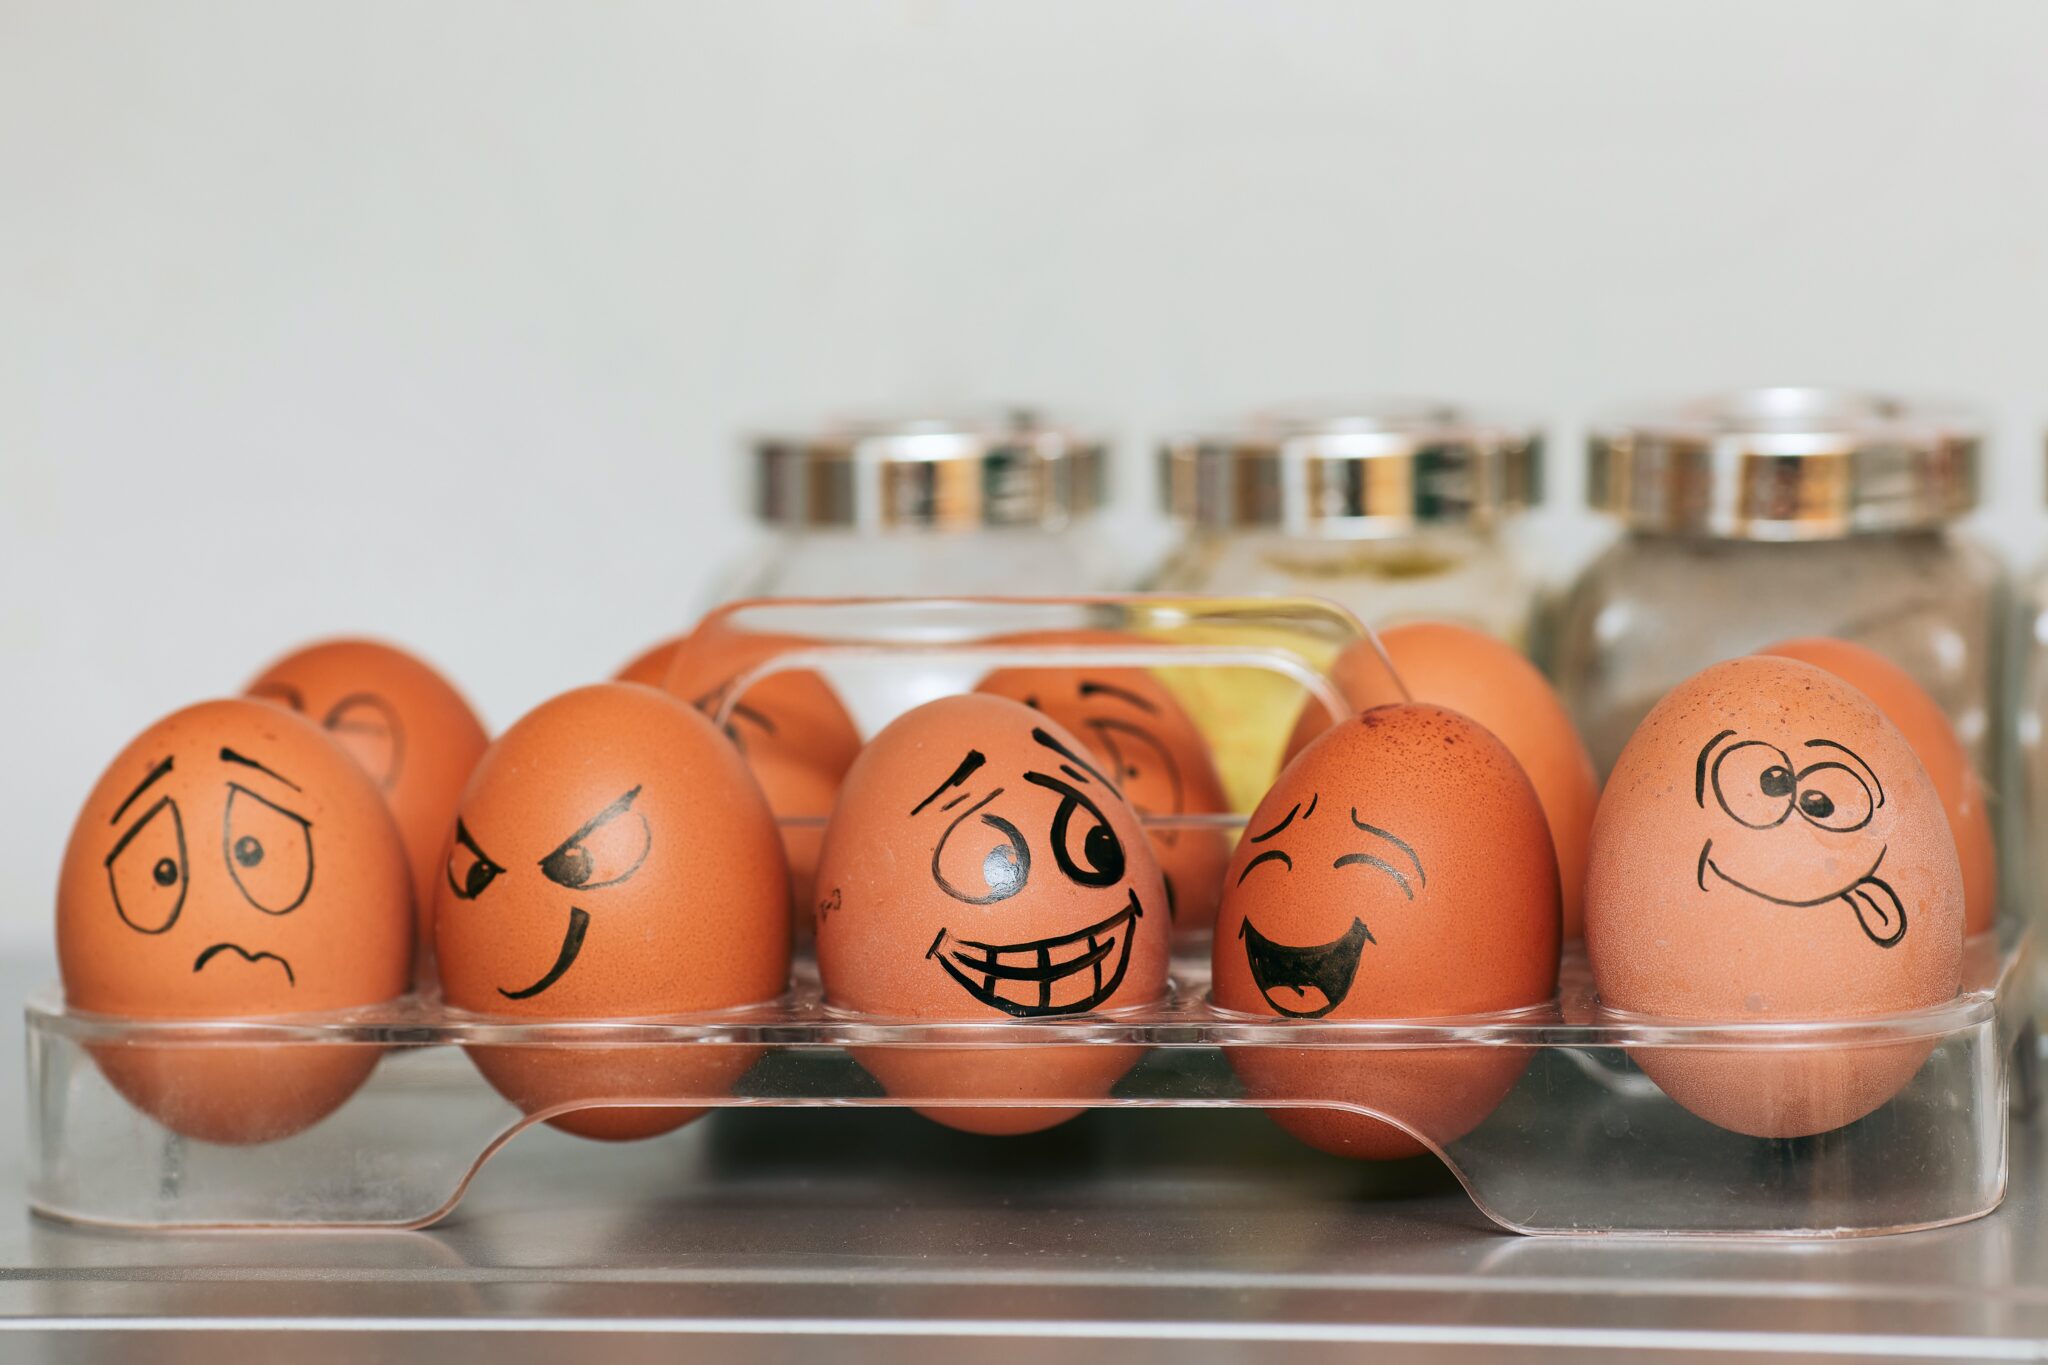 carton of brown eggs with funny faces drawn on